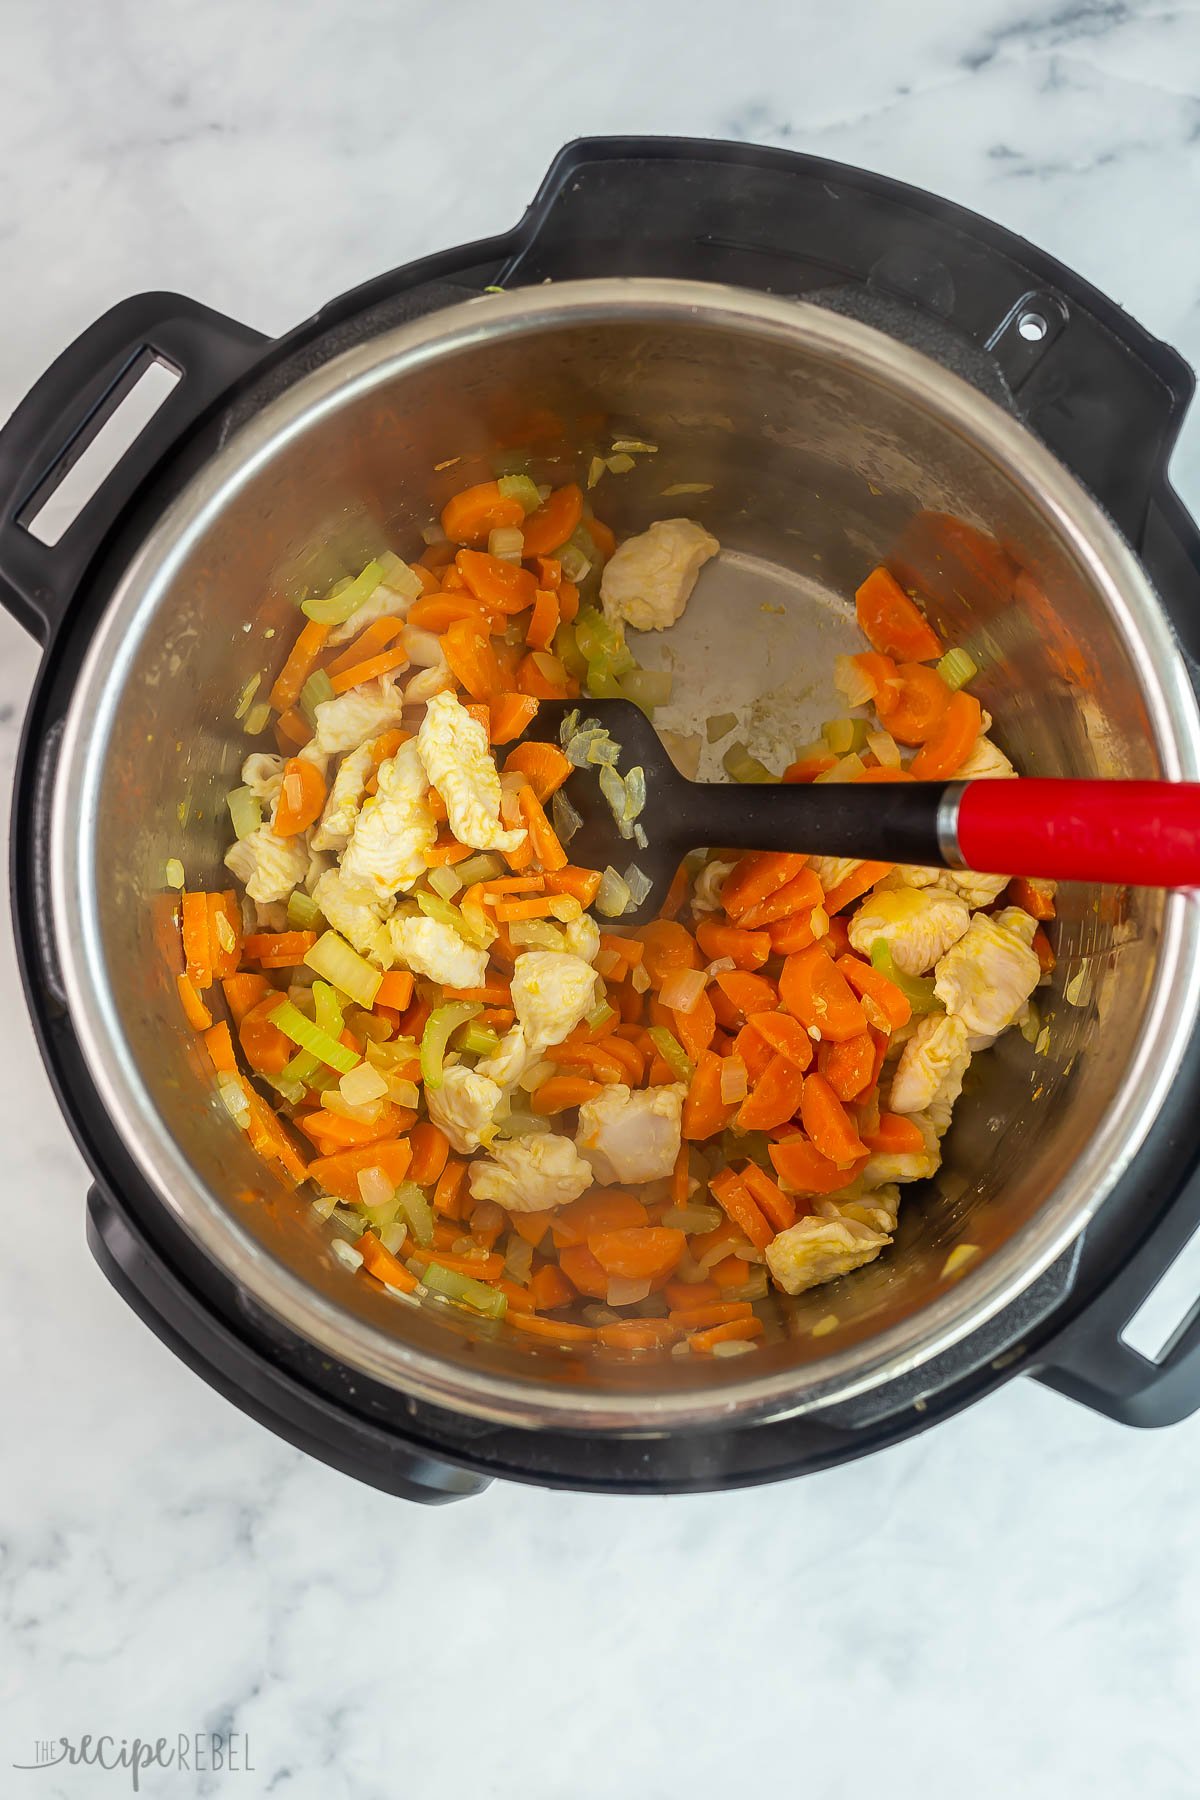 chicken pieces added to vegetables sauteeing in instant pot.